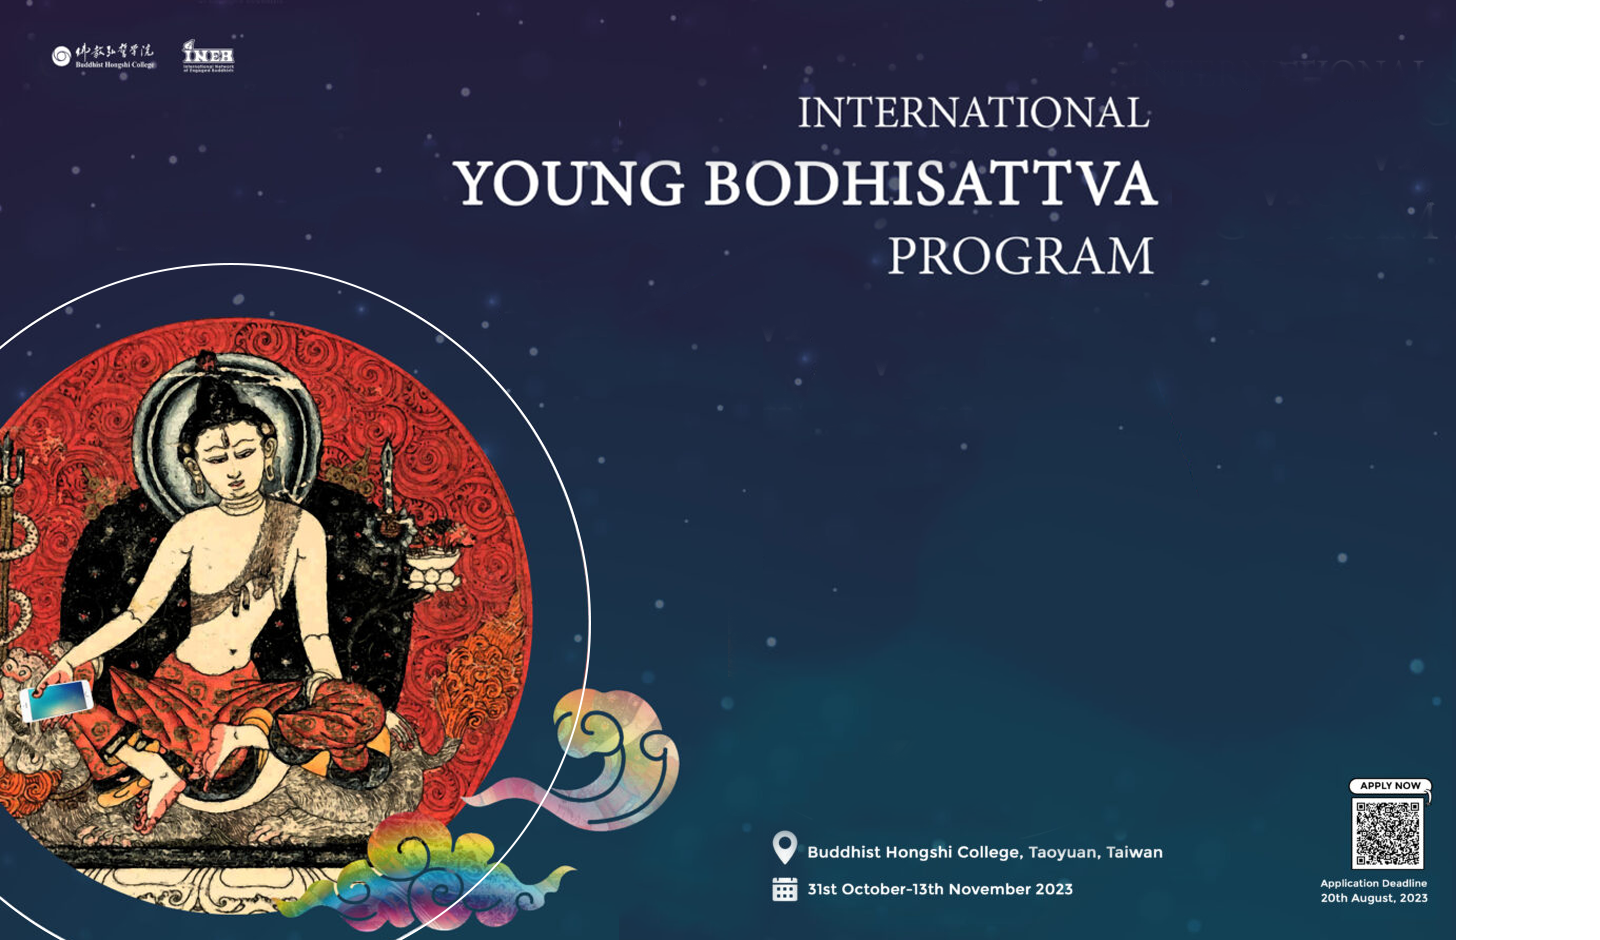  Young BodhisattvaThe International Young Bodhisattva Program aims to develop young people’s confidence, capacity, and commitment to social and spiritual transformation.